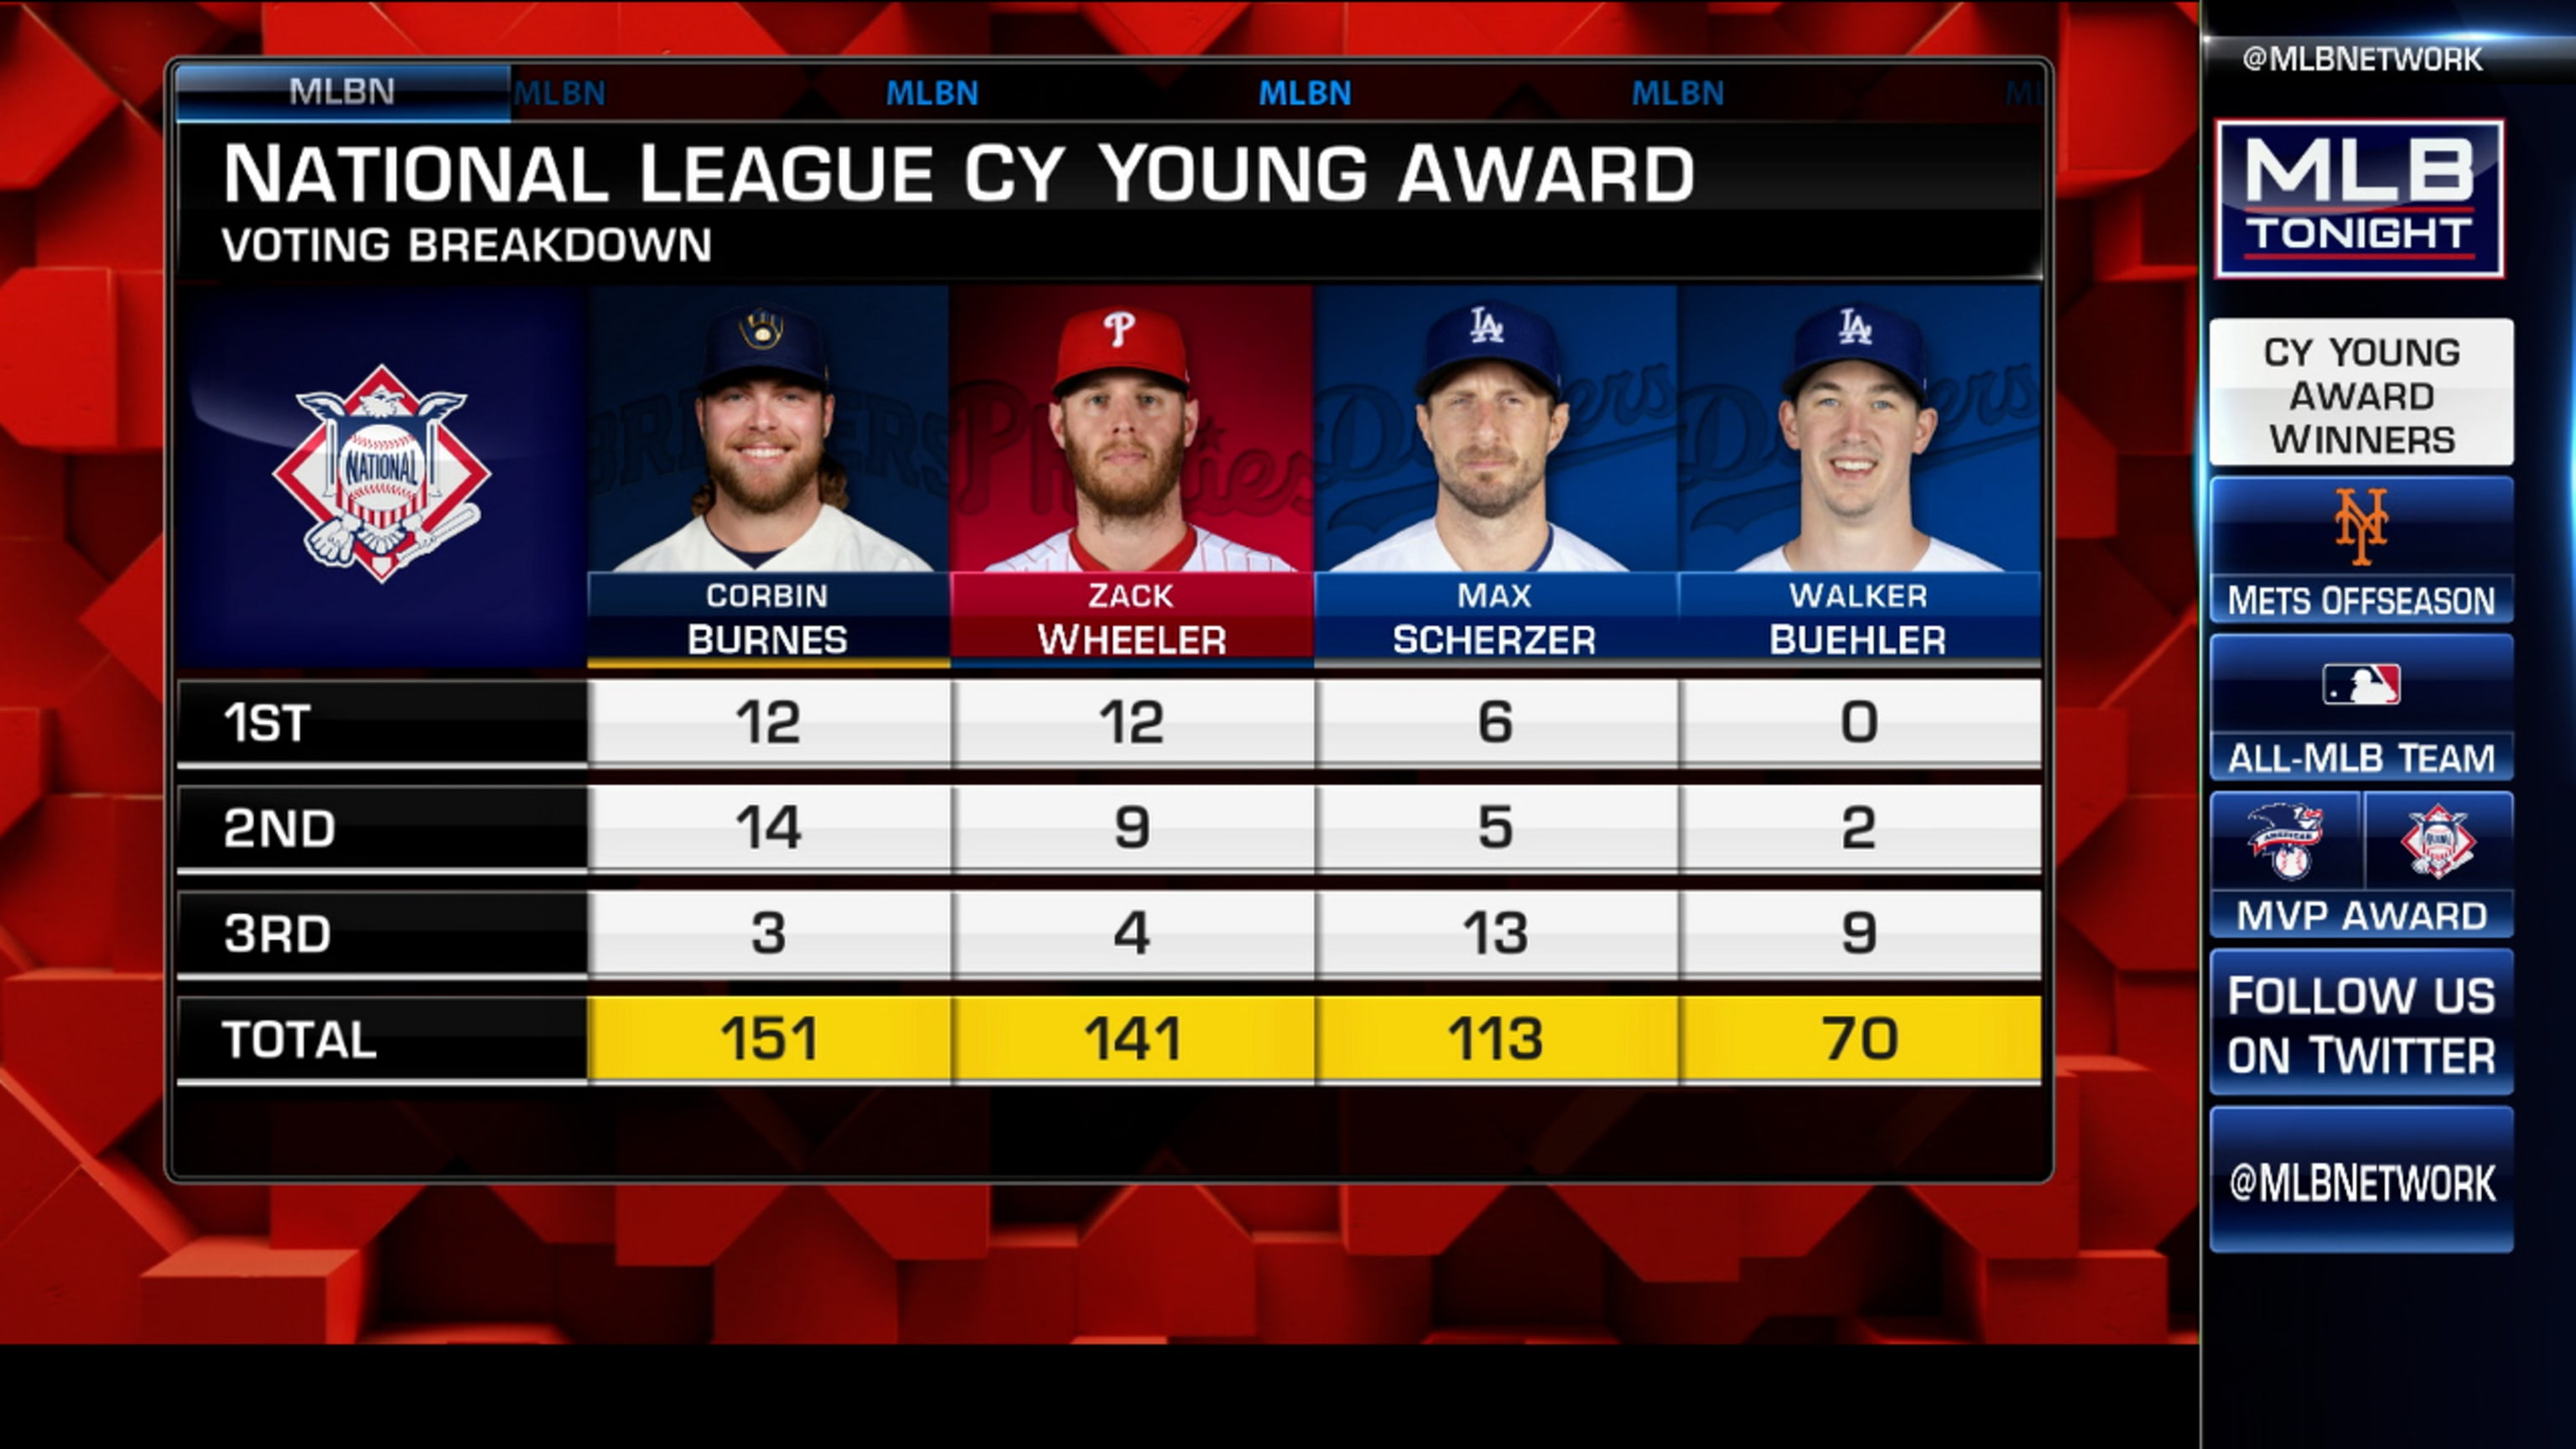 NL Cy Young Award Has a Clear Favorite